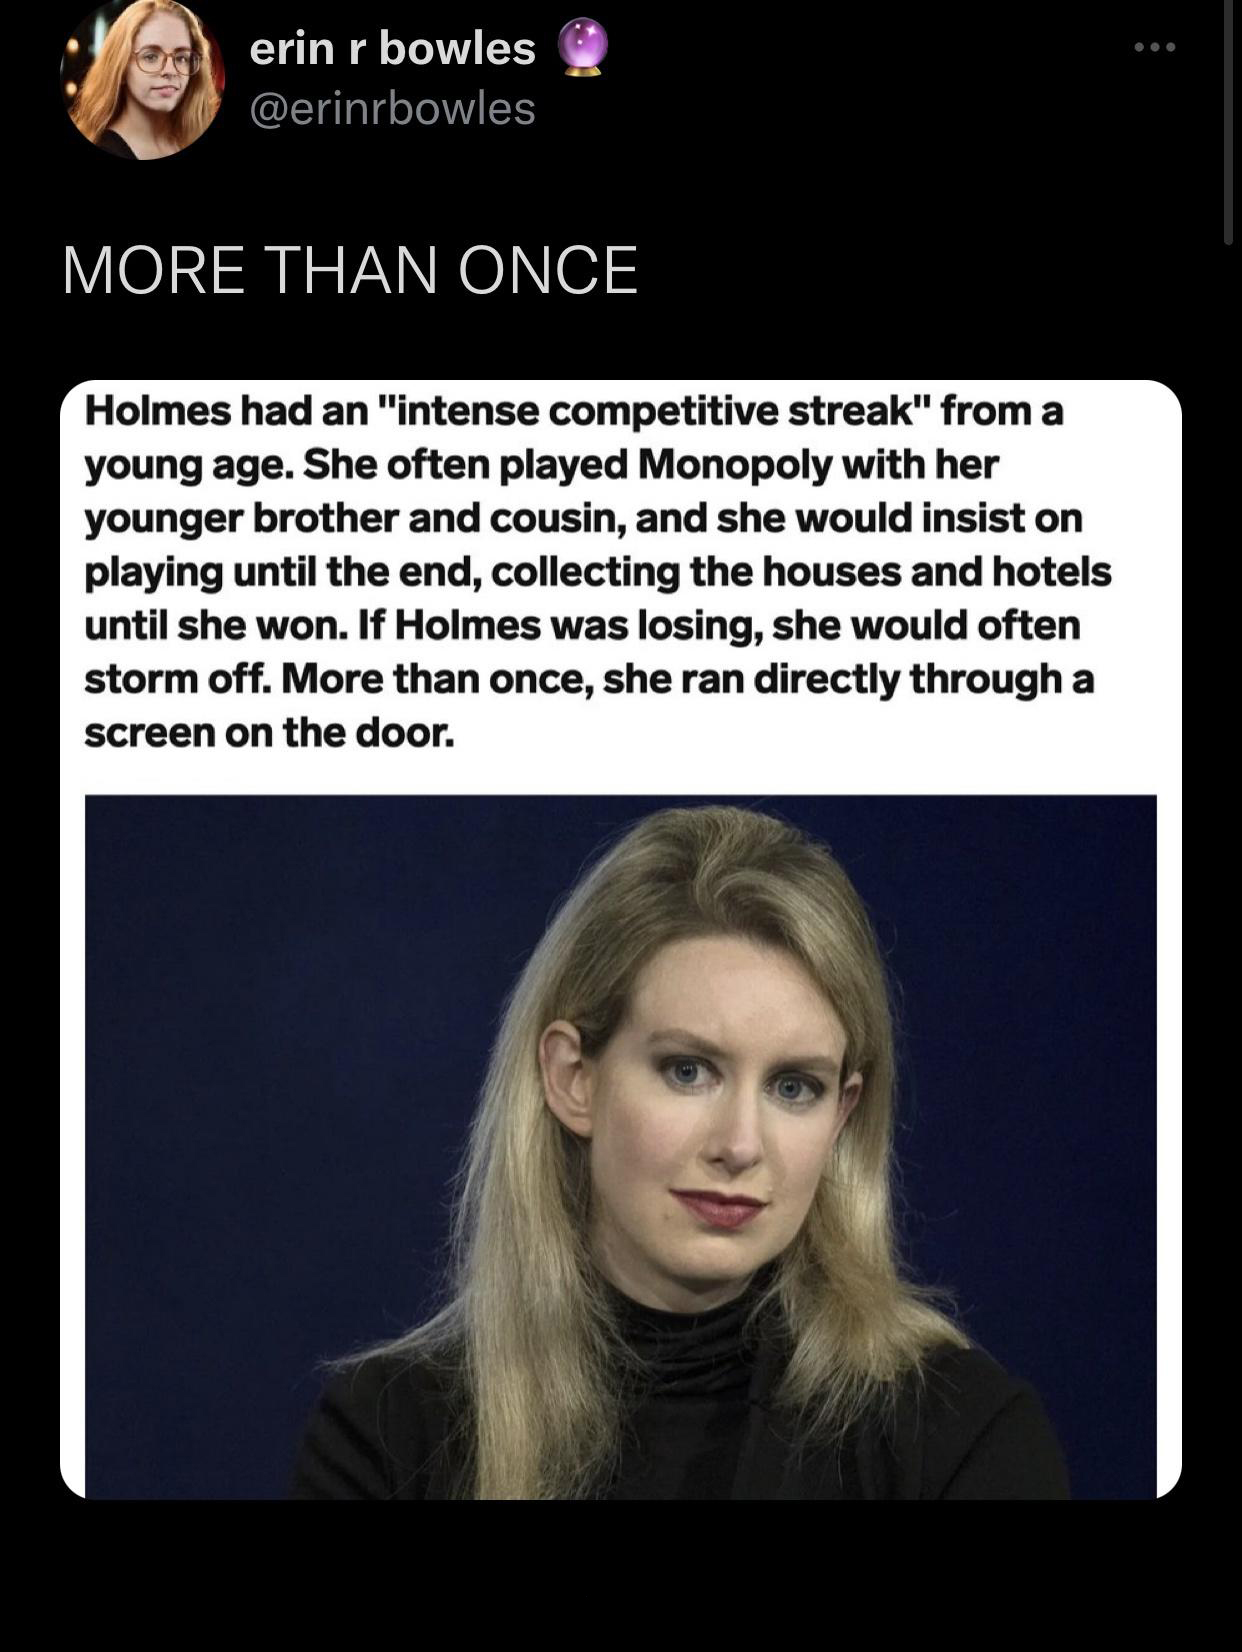 elizabeth holmes - erin r bowles More Than Once Holmes had an "intense competitive streak" from a young age. She often played Monopoly with her younger brother and cousin, and she would insist on playing until the end, collecting the houses and hotels unt